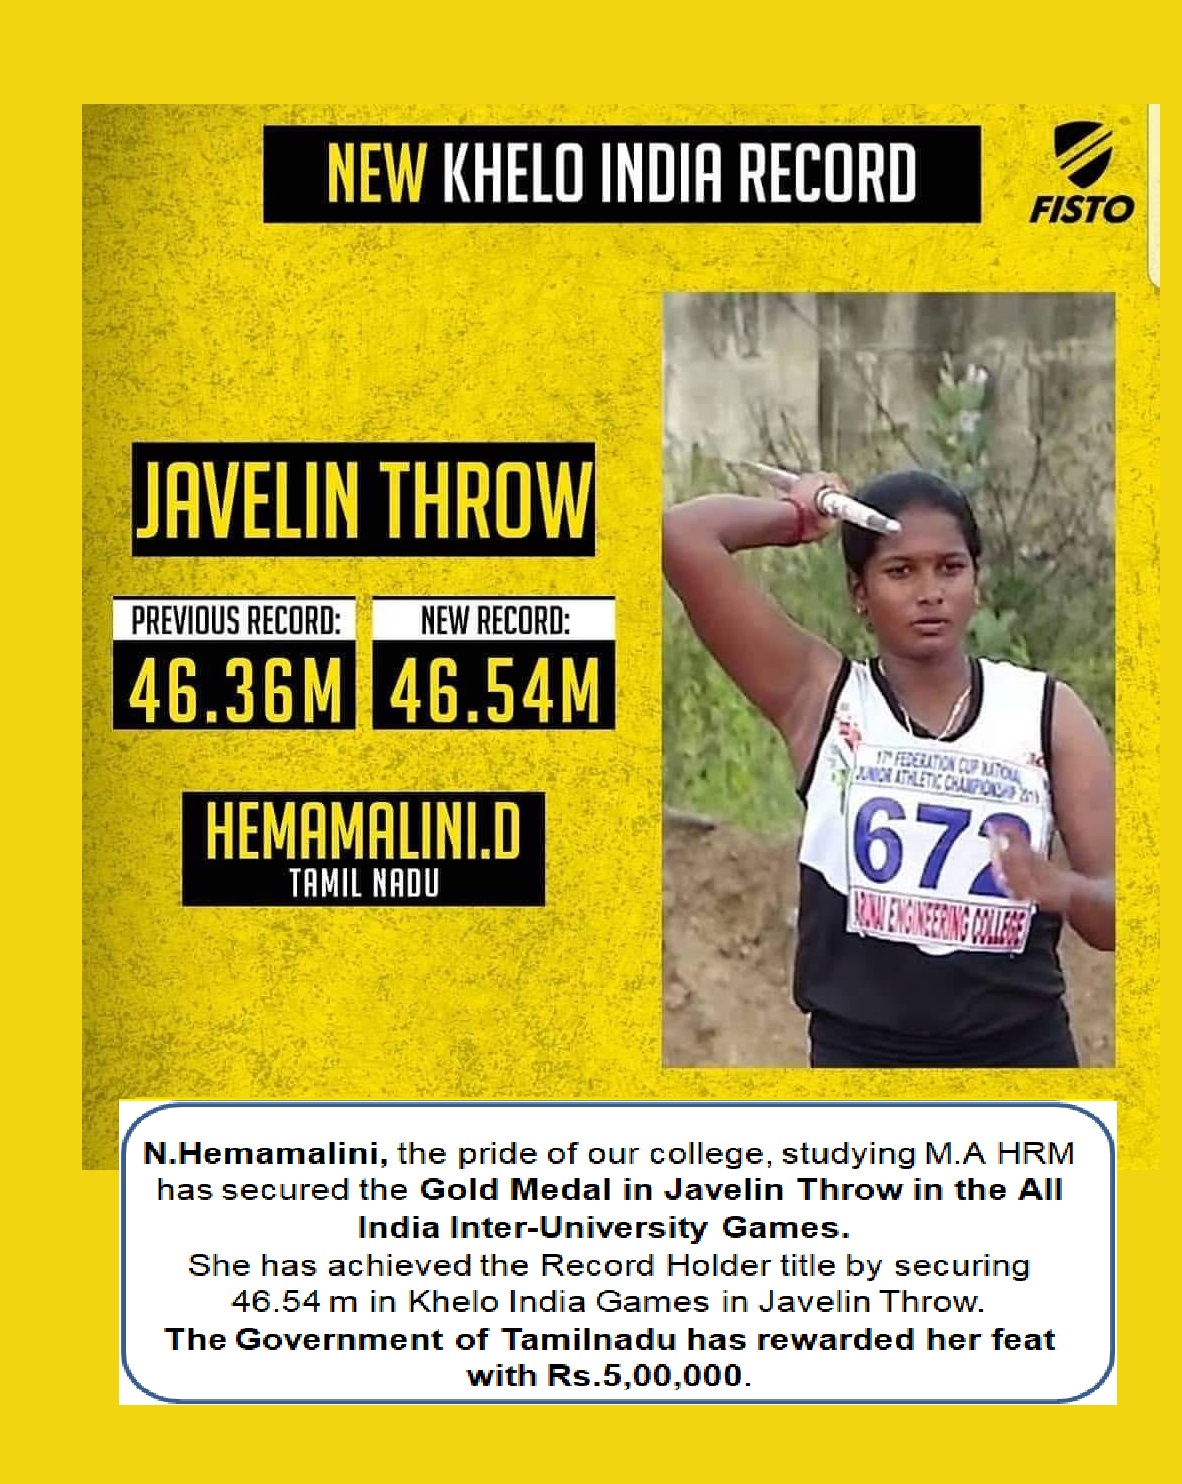 N.Hemamalini, the pride of our college, studying M.A HRM has secured the Gold Medal in Javelin Throw in the All India Inter-University Games. She has achieved the Record Holder title by securing 46.54 m in Khelo India Games in Javelin Throw. The Government of Tamilnadu has rewarded her feat with Rs.5,00,000.